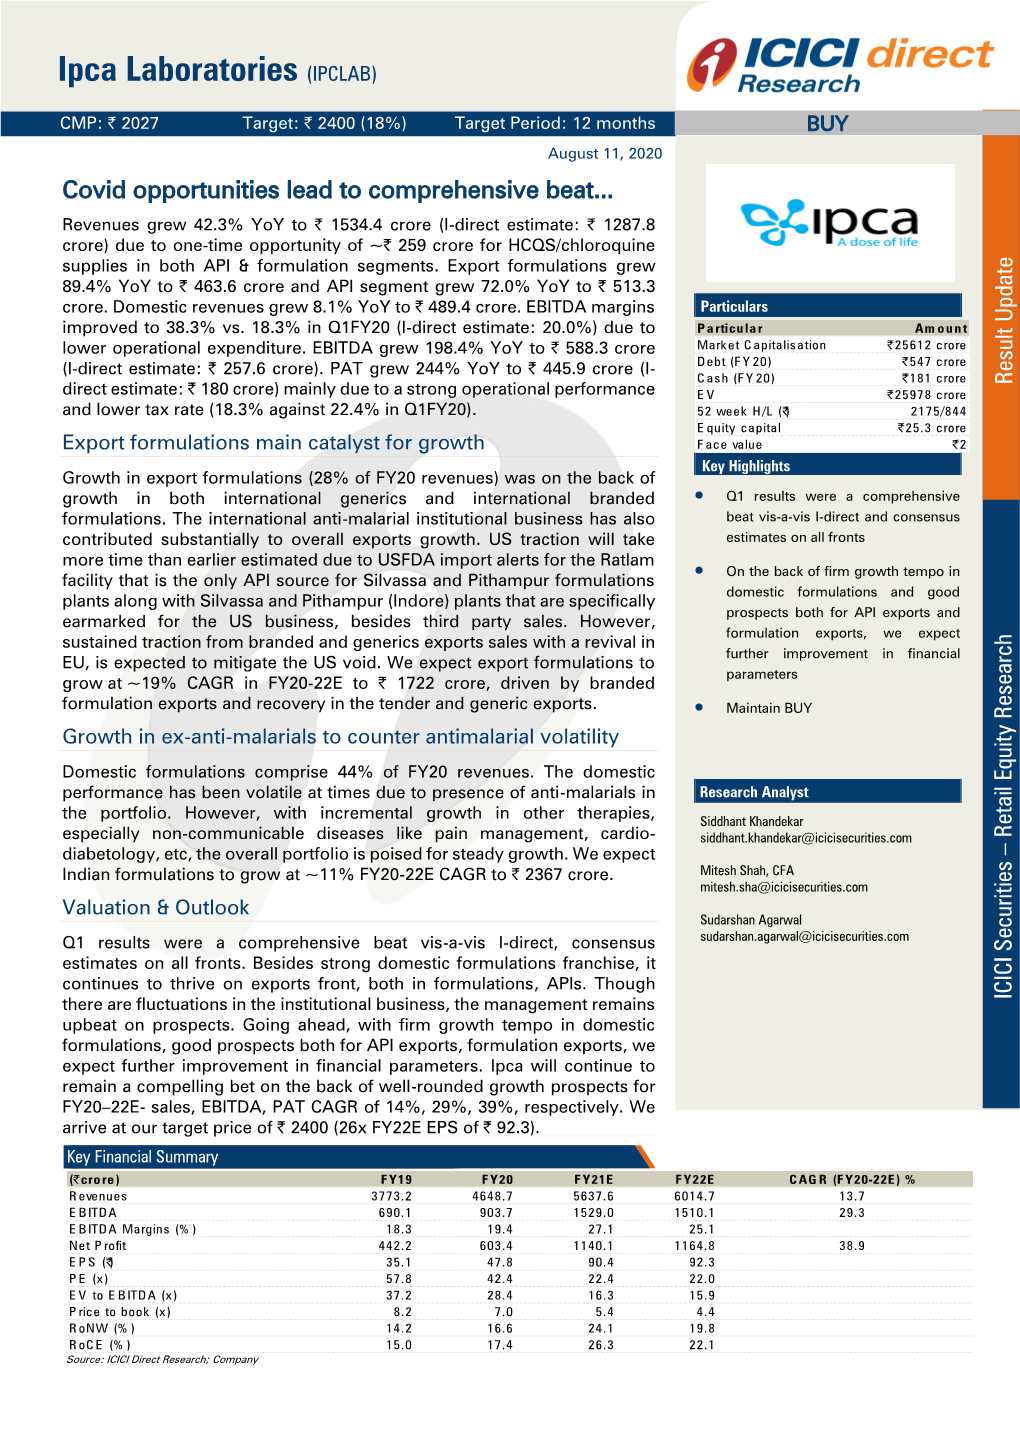 Result Update | Ipca Laboratories ICICI Direct Research